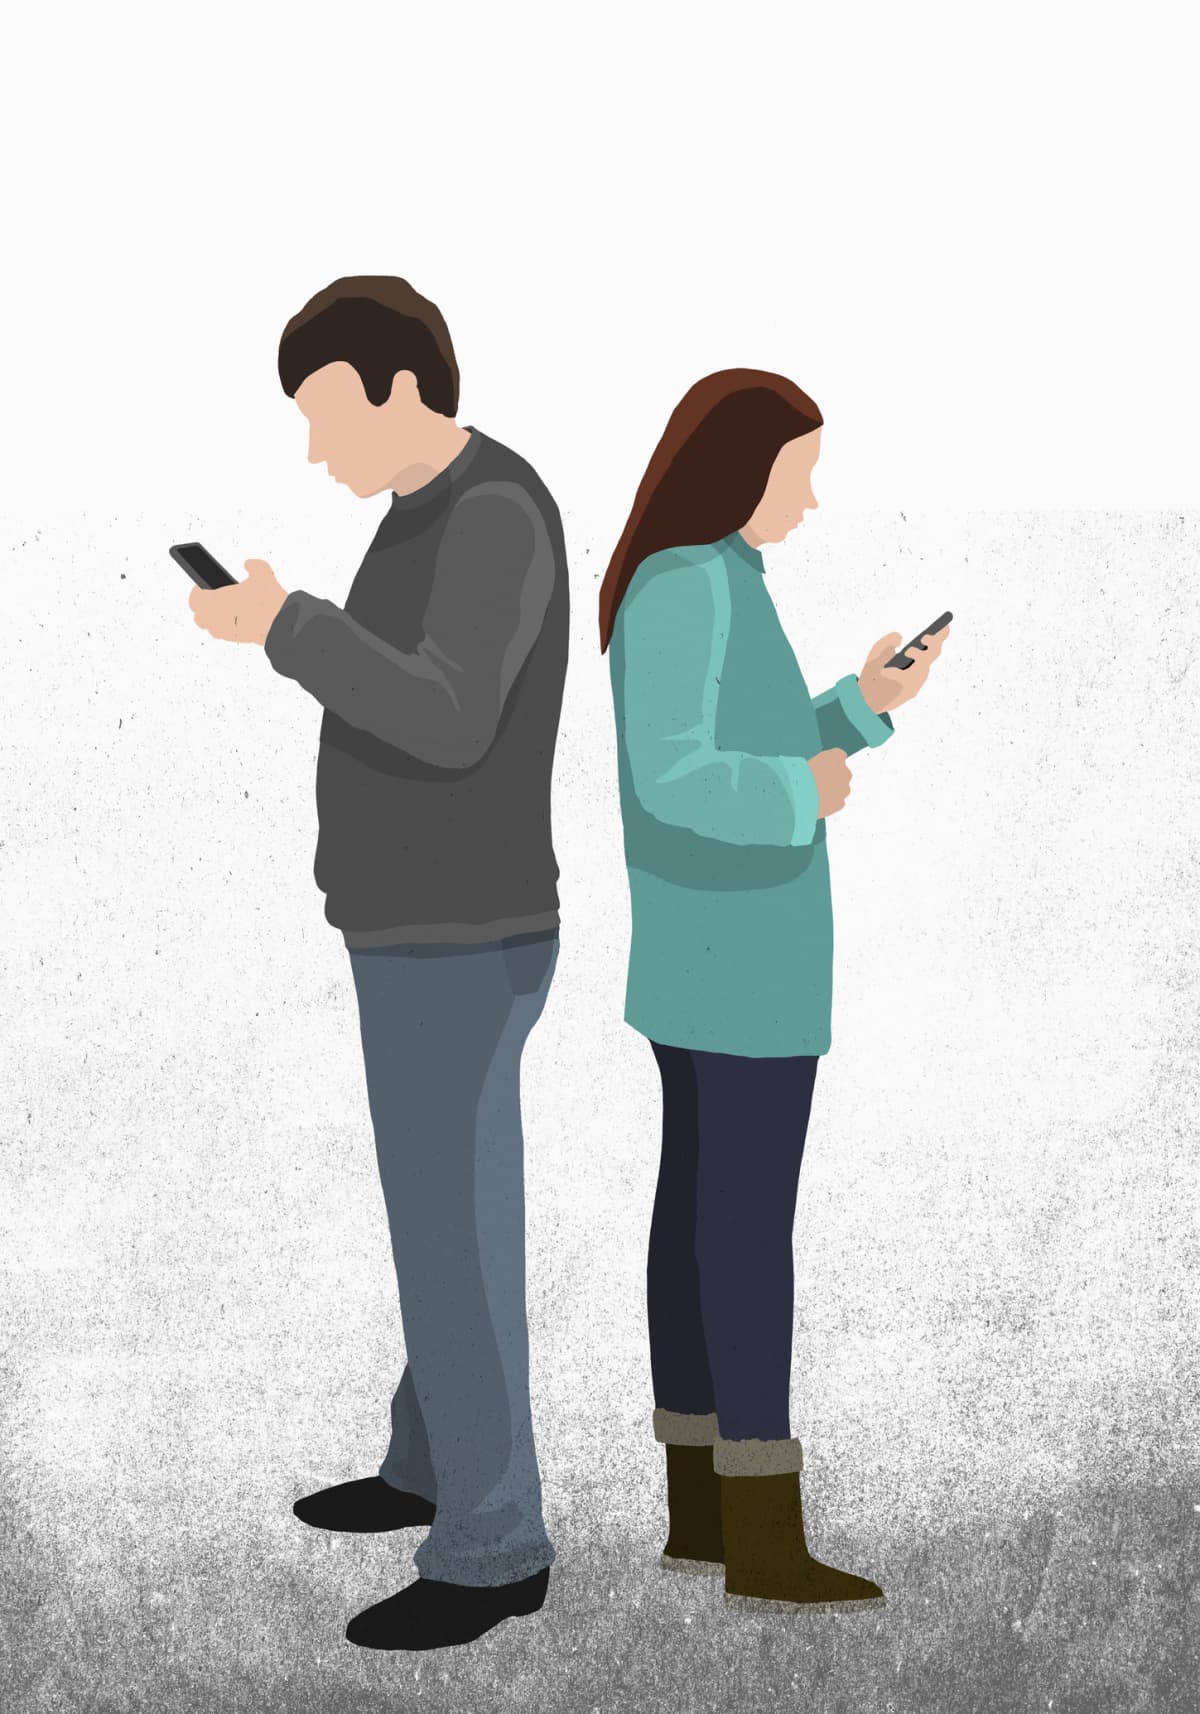 Cartoon drawing of a man and woman standing back to back on their phones